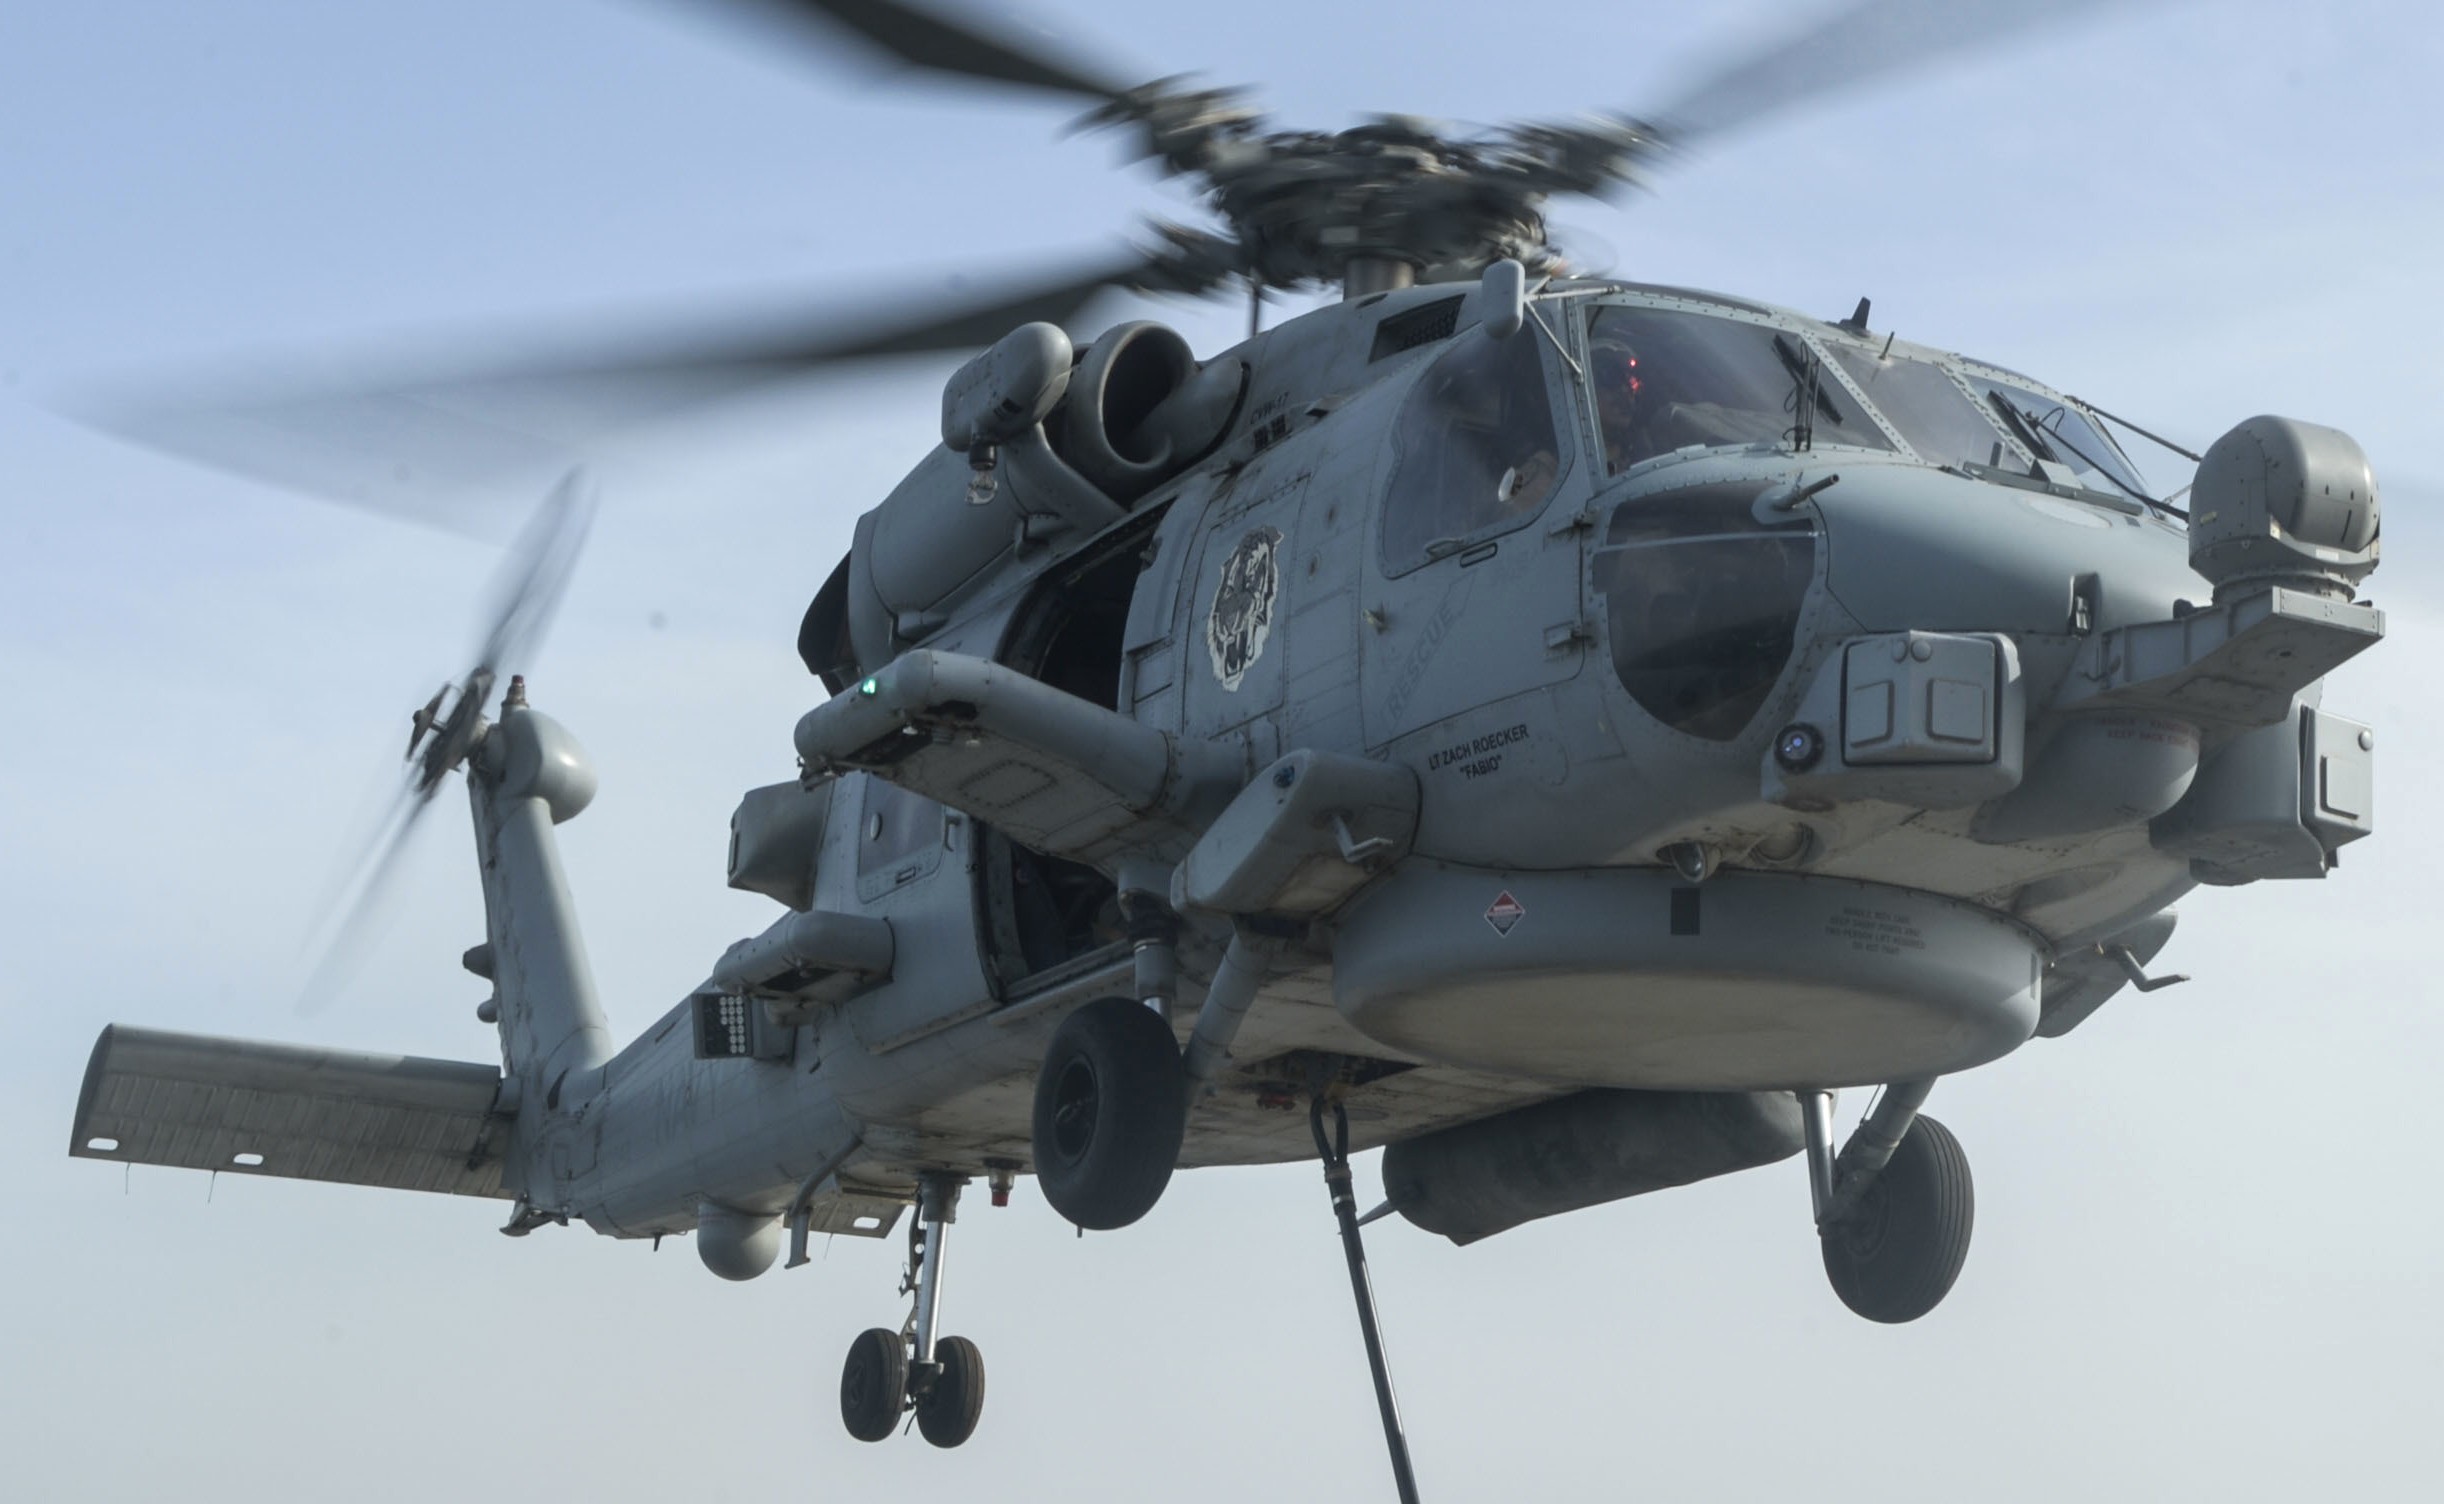 hsm-73 battlecats helicopter maritime strike squadron mh-60r seahawk cg-52 uss bunker hill 2018 19